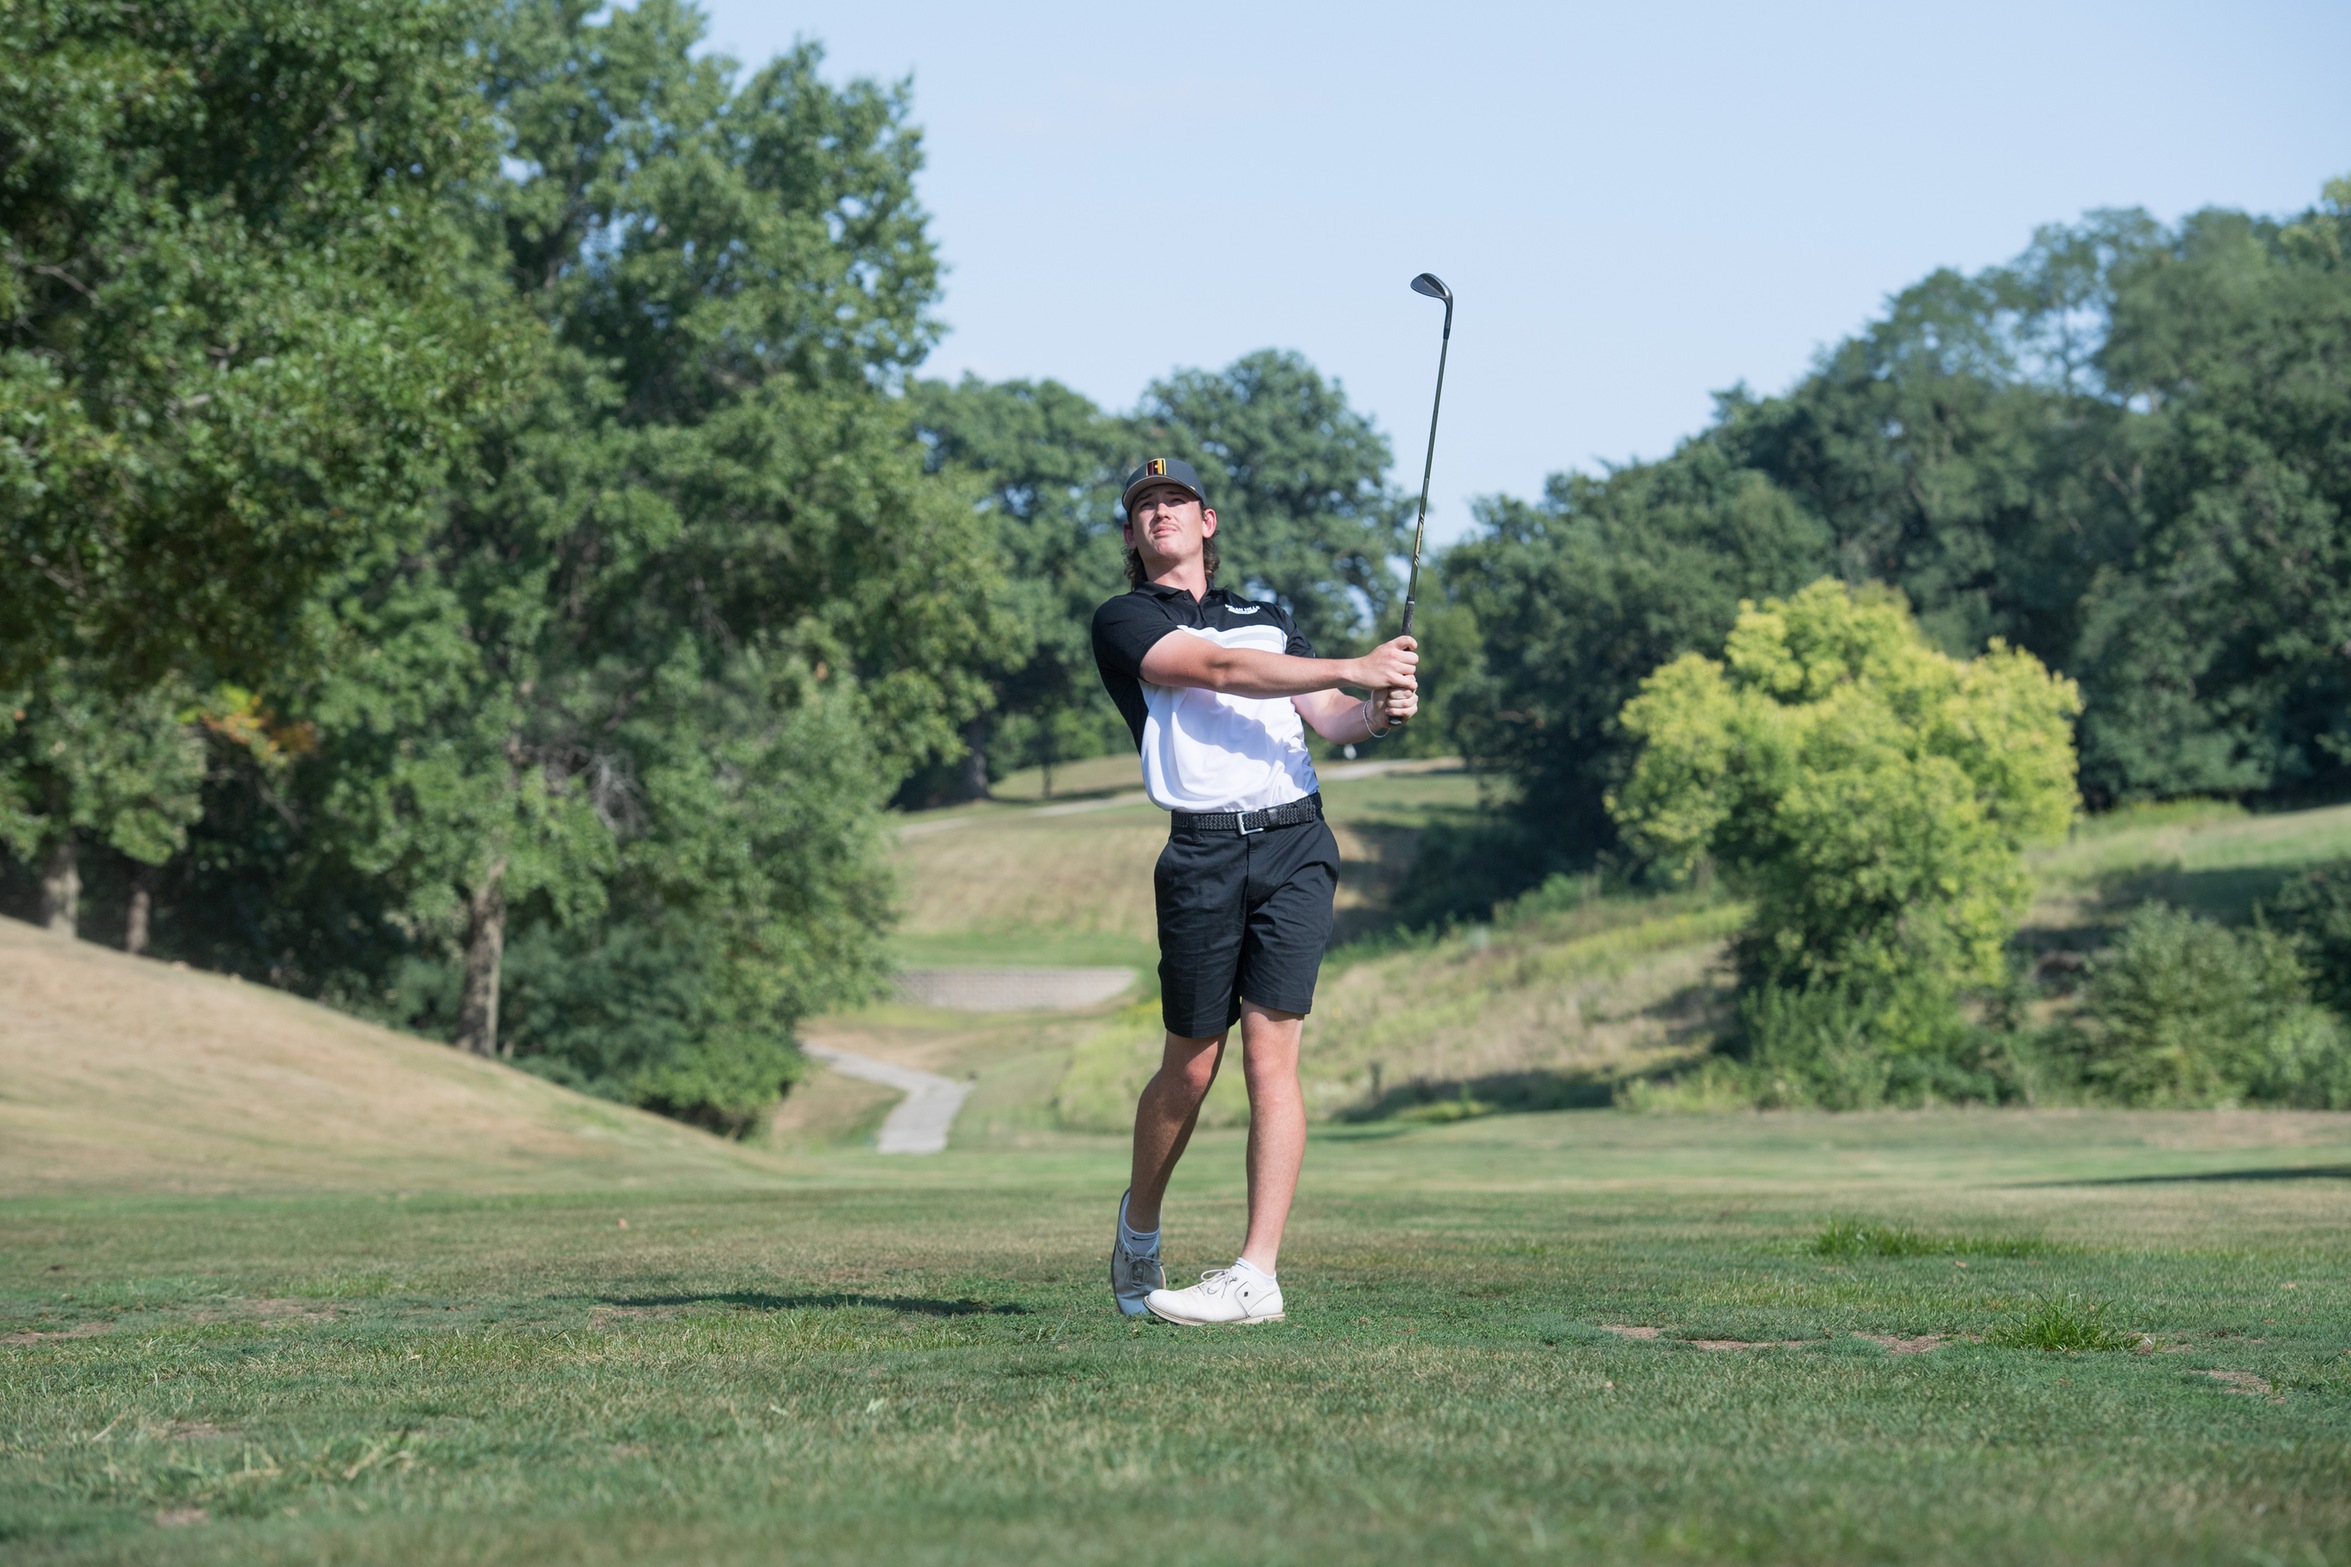 REVIE NAMED ICCAC GOLFER OF THE WEEK